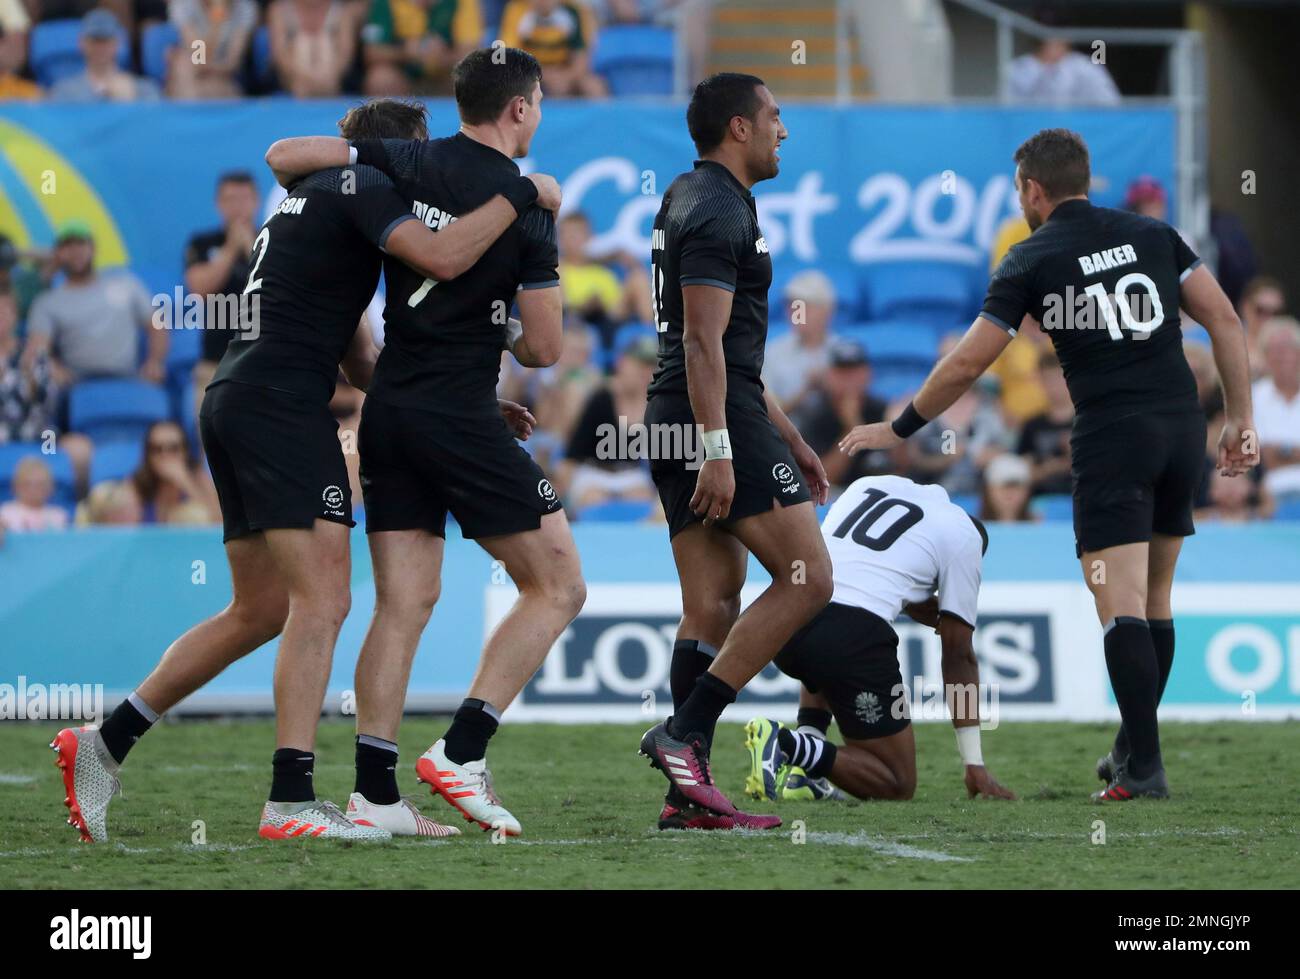 New Zealand players celebrate after defeating Fiji in their rugby sevens gold medal match at Robina Stadium during the 2018 Commonwealth Games on the Gold Coast, Australia, Sunday, April 15, 2018